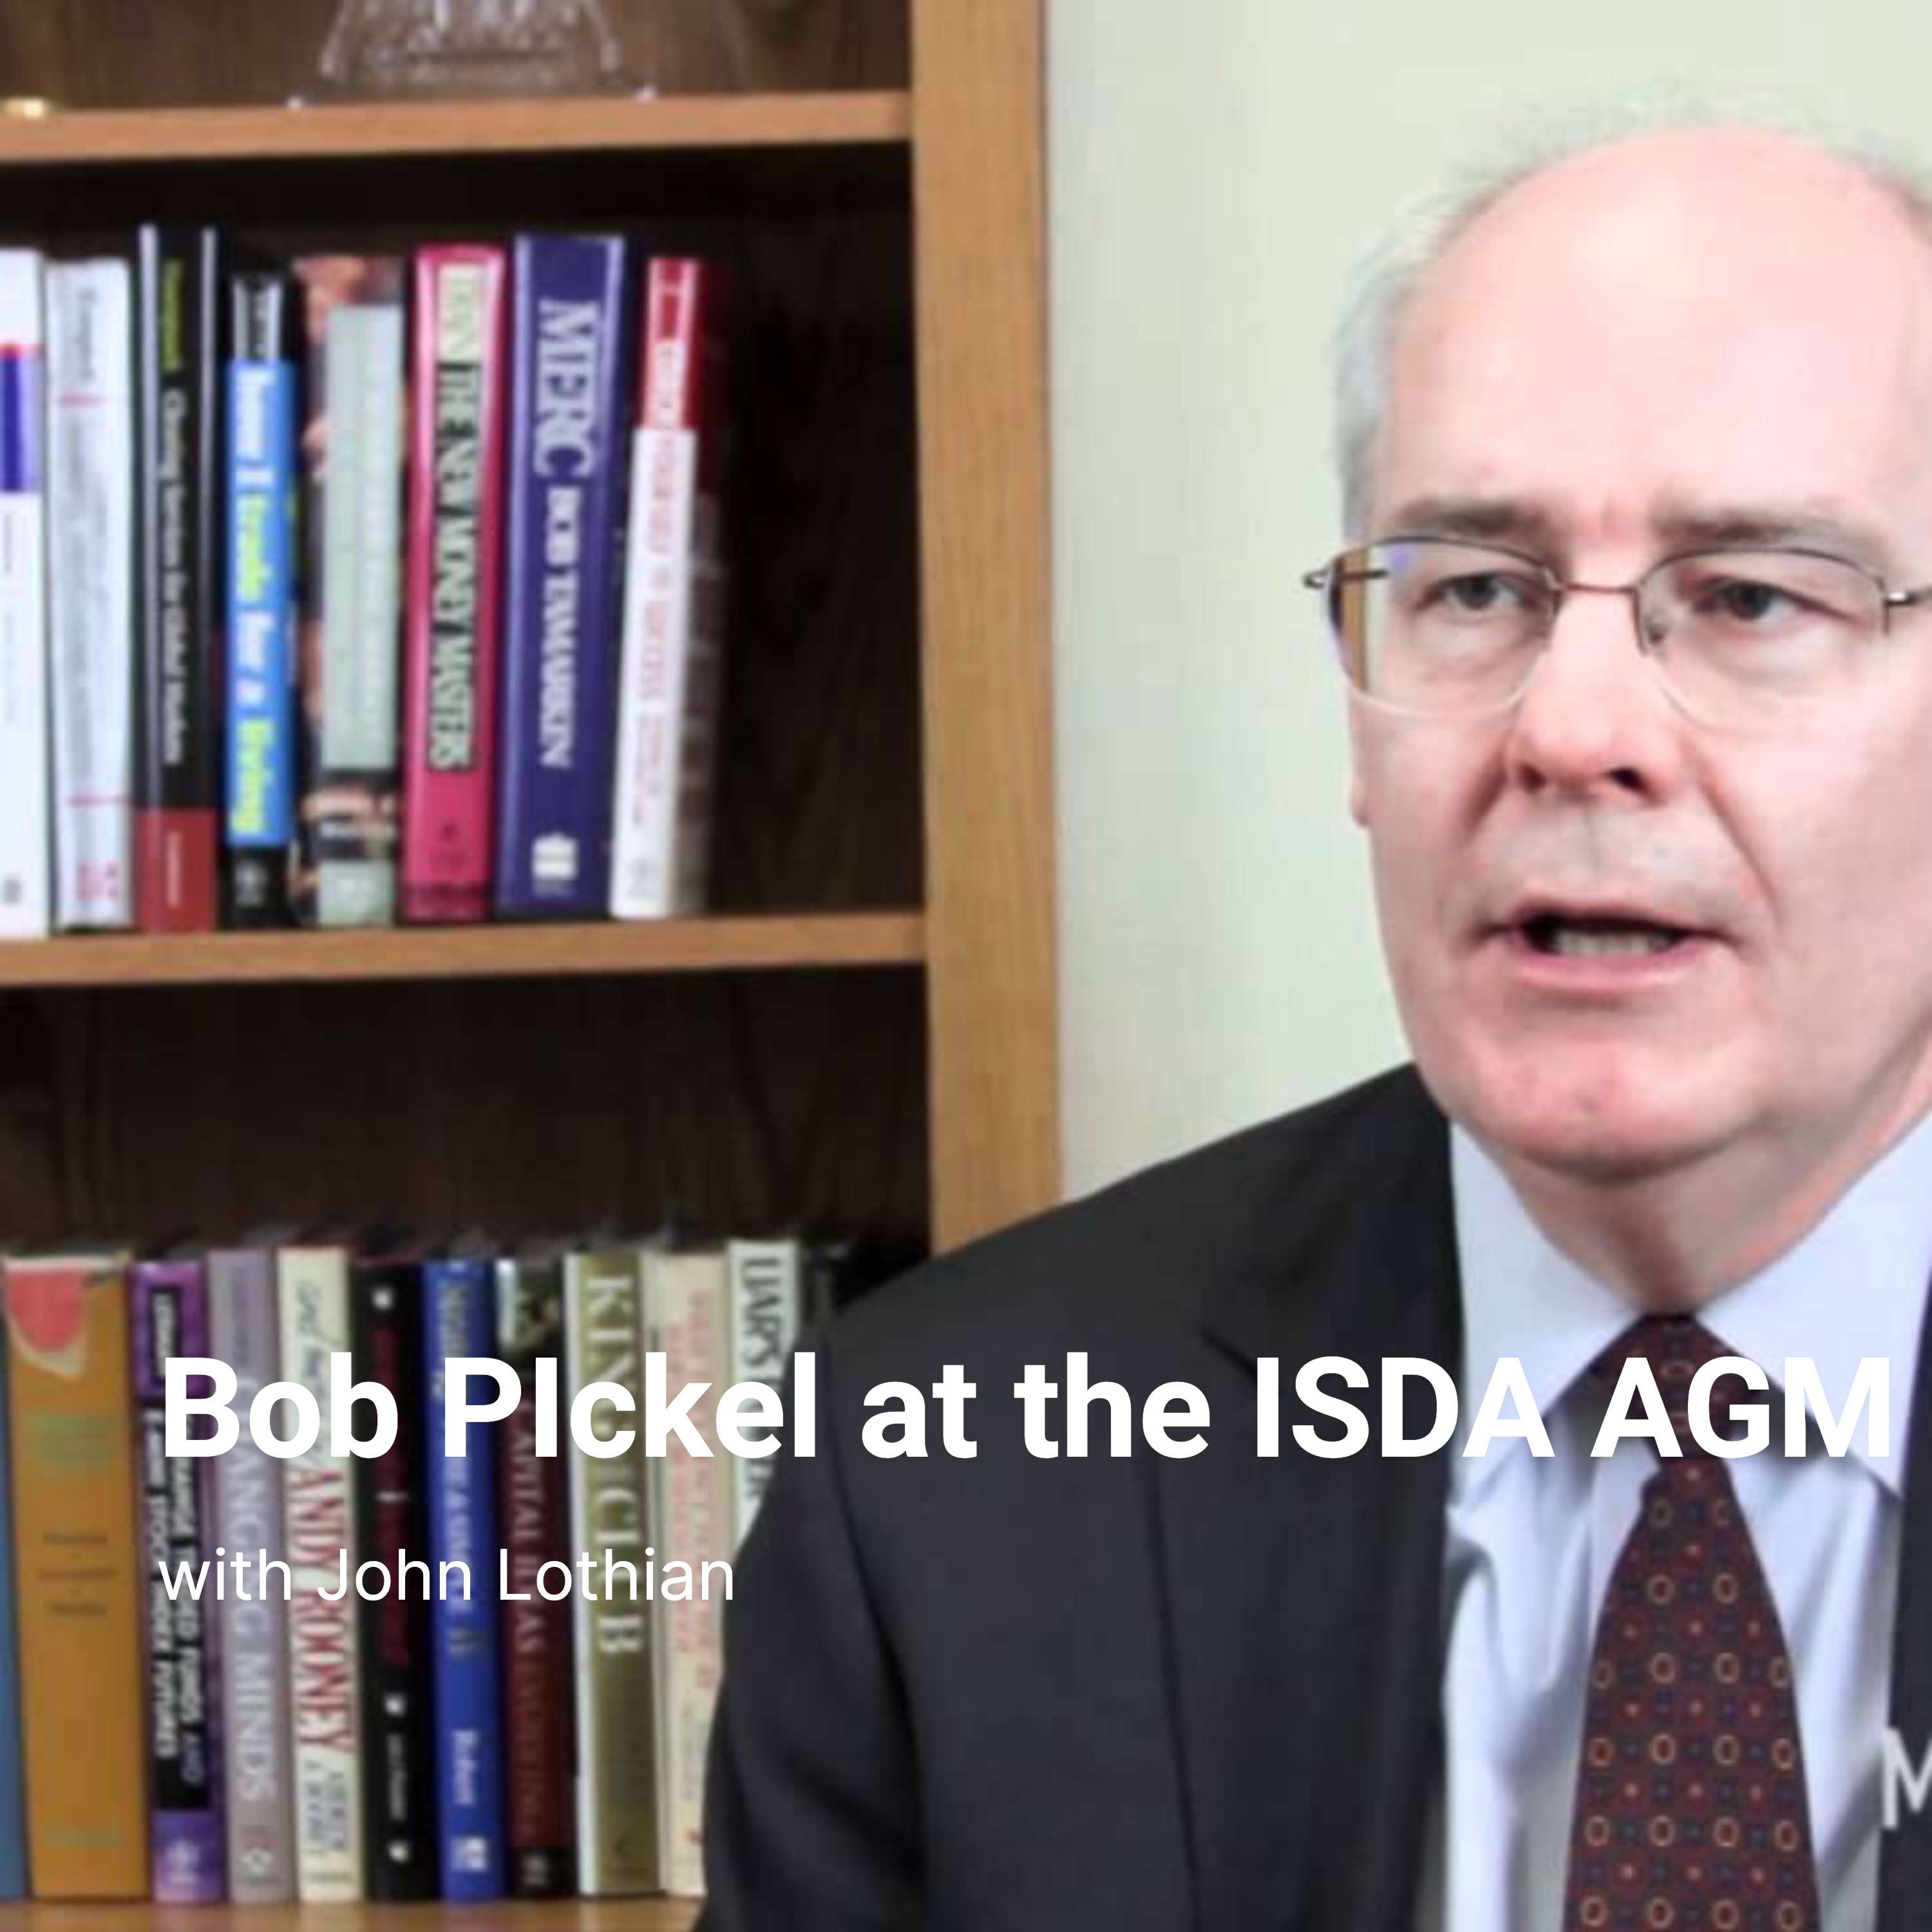 Bob Pickel at the ISDA AGM in Chicago